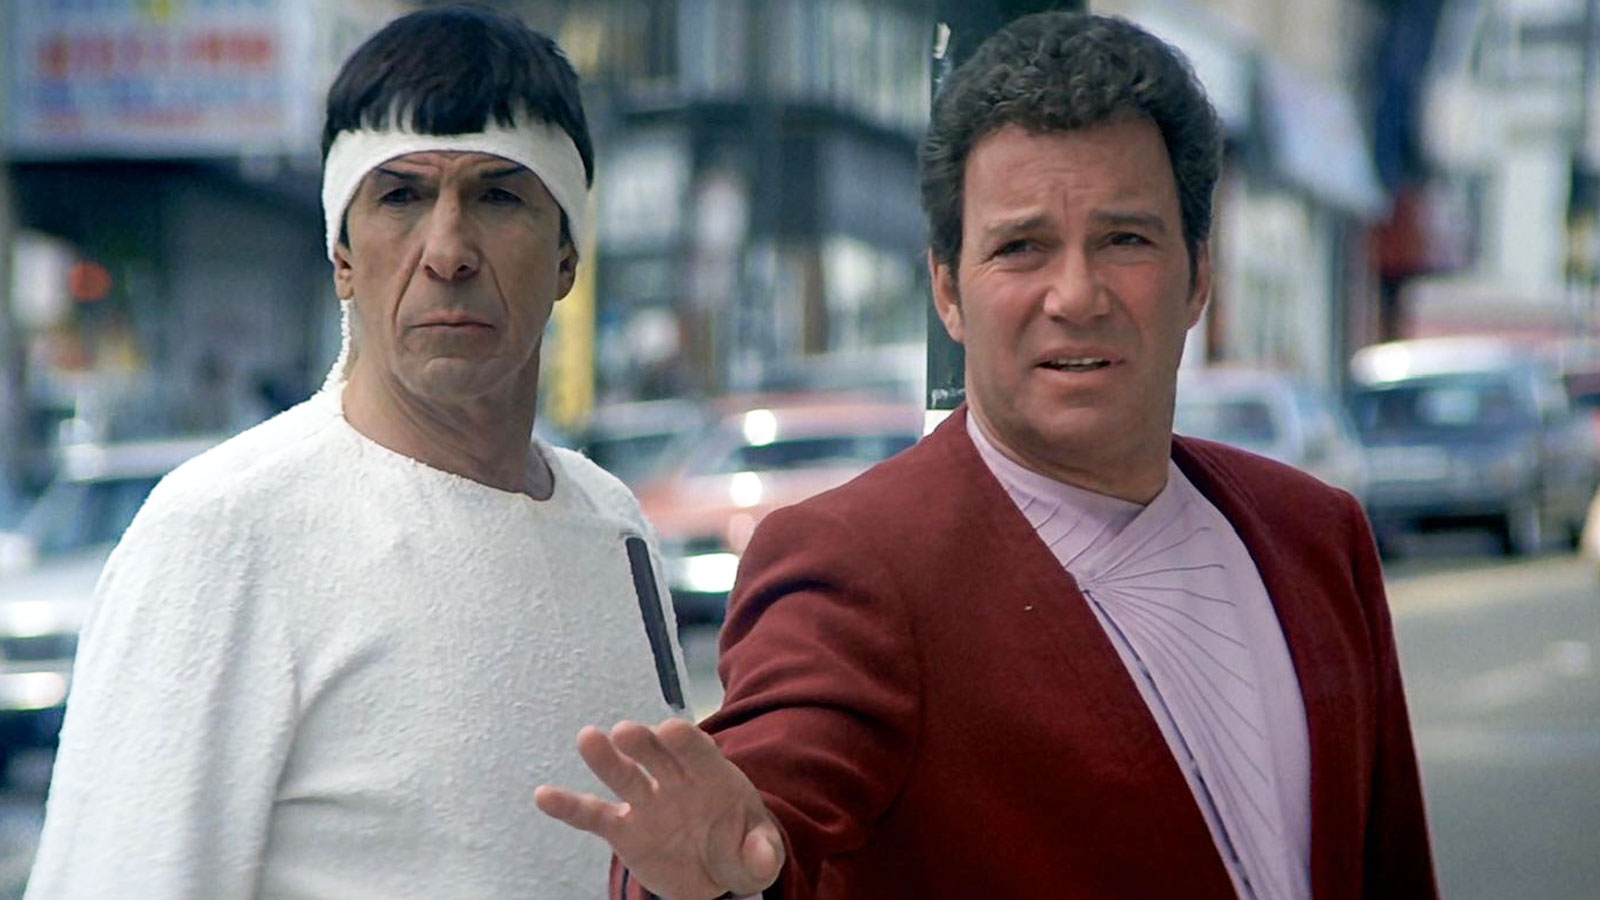 Star Trek IV: The Voyage Home returns to theaters for 2 nights to celebrate the film's 35th anniversary.NET. Your daily dose of Star Trek news and opinion